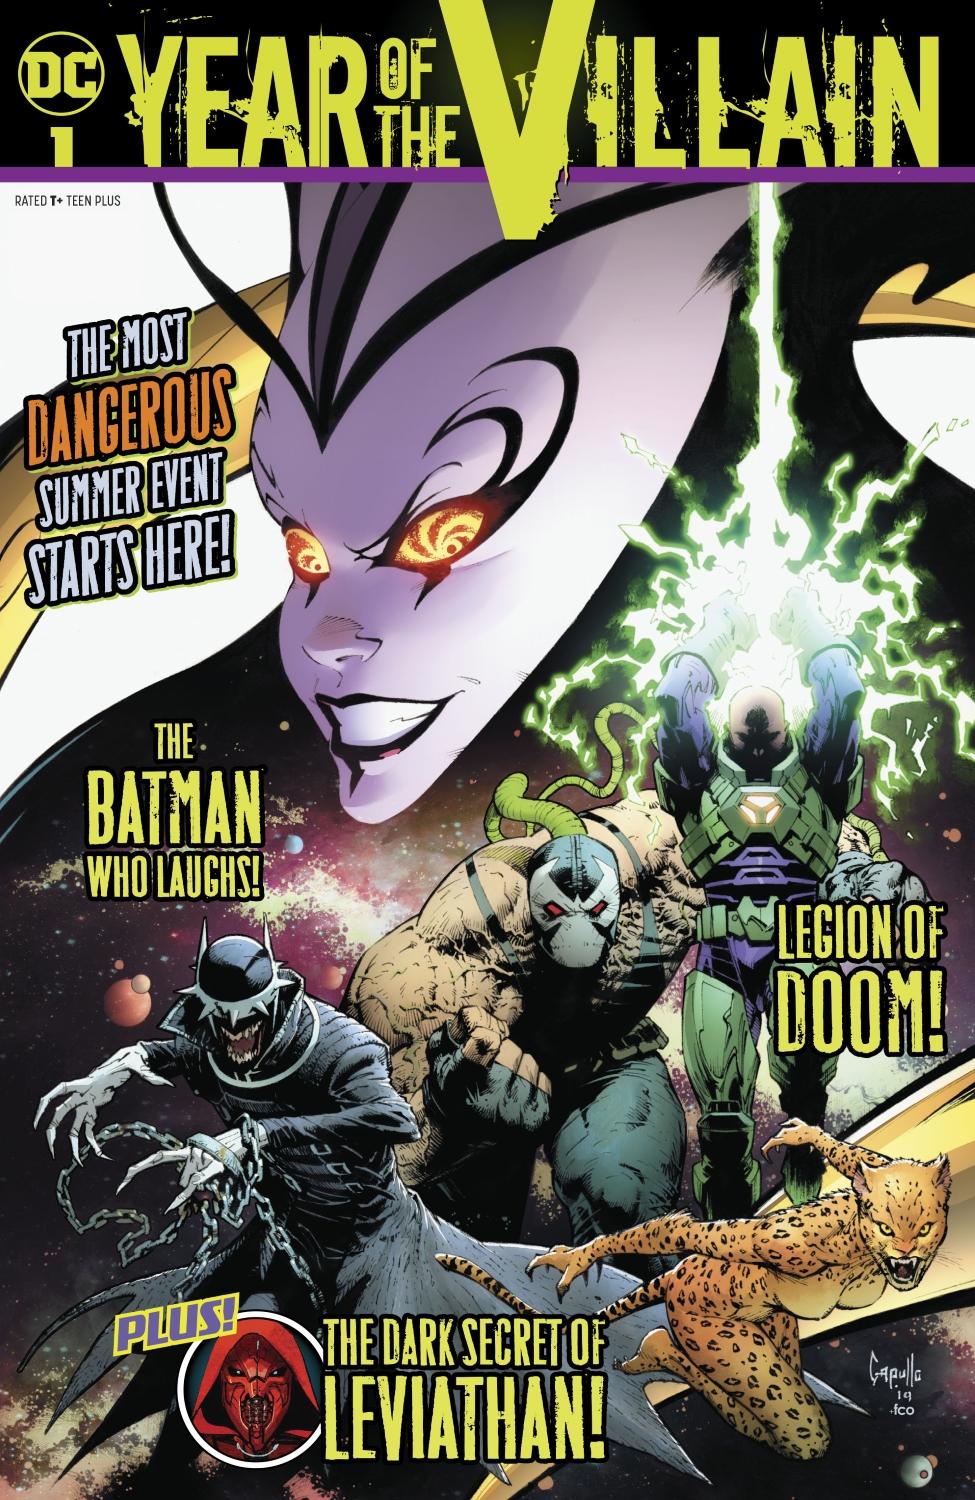 DC's Year of the Villain Special Vol. 1 #1